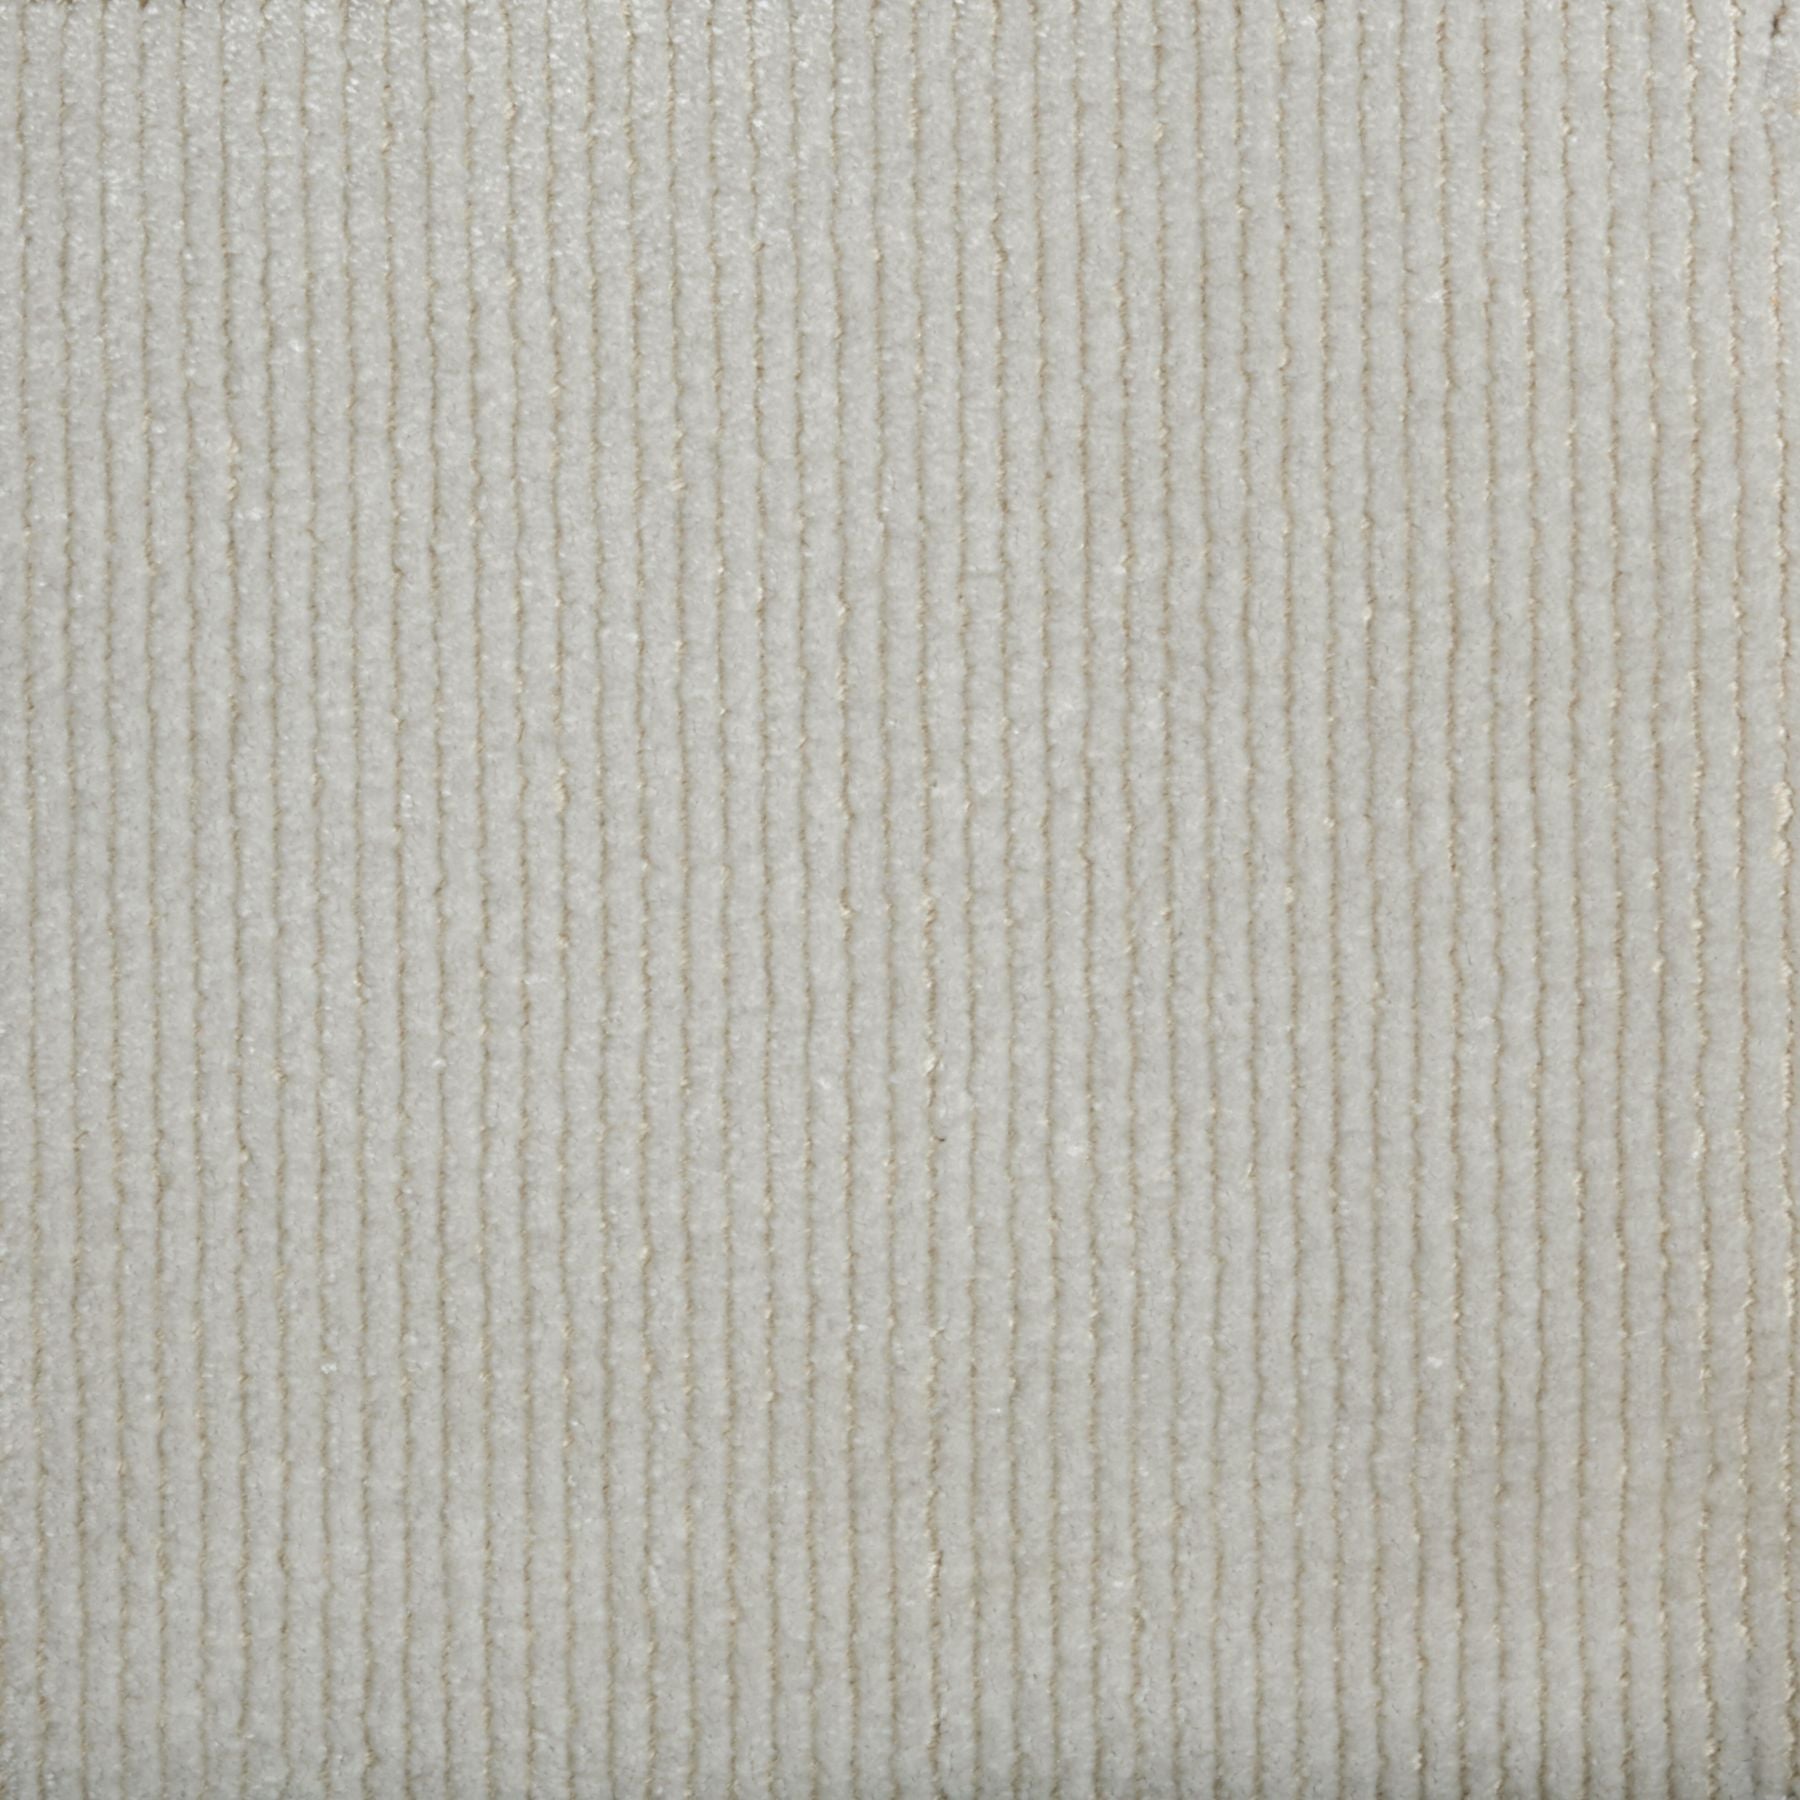 Synthetic-blend broadloom carpet swatch in a dimensional ribbed weave in greige.